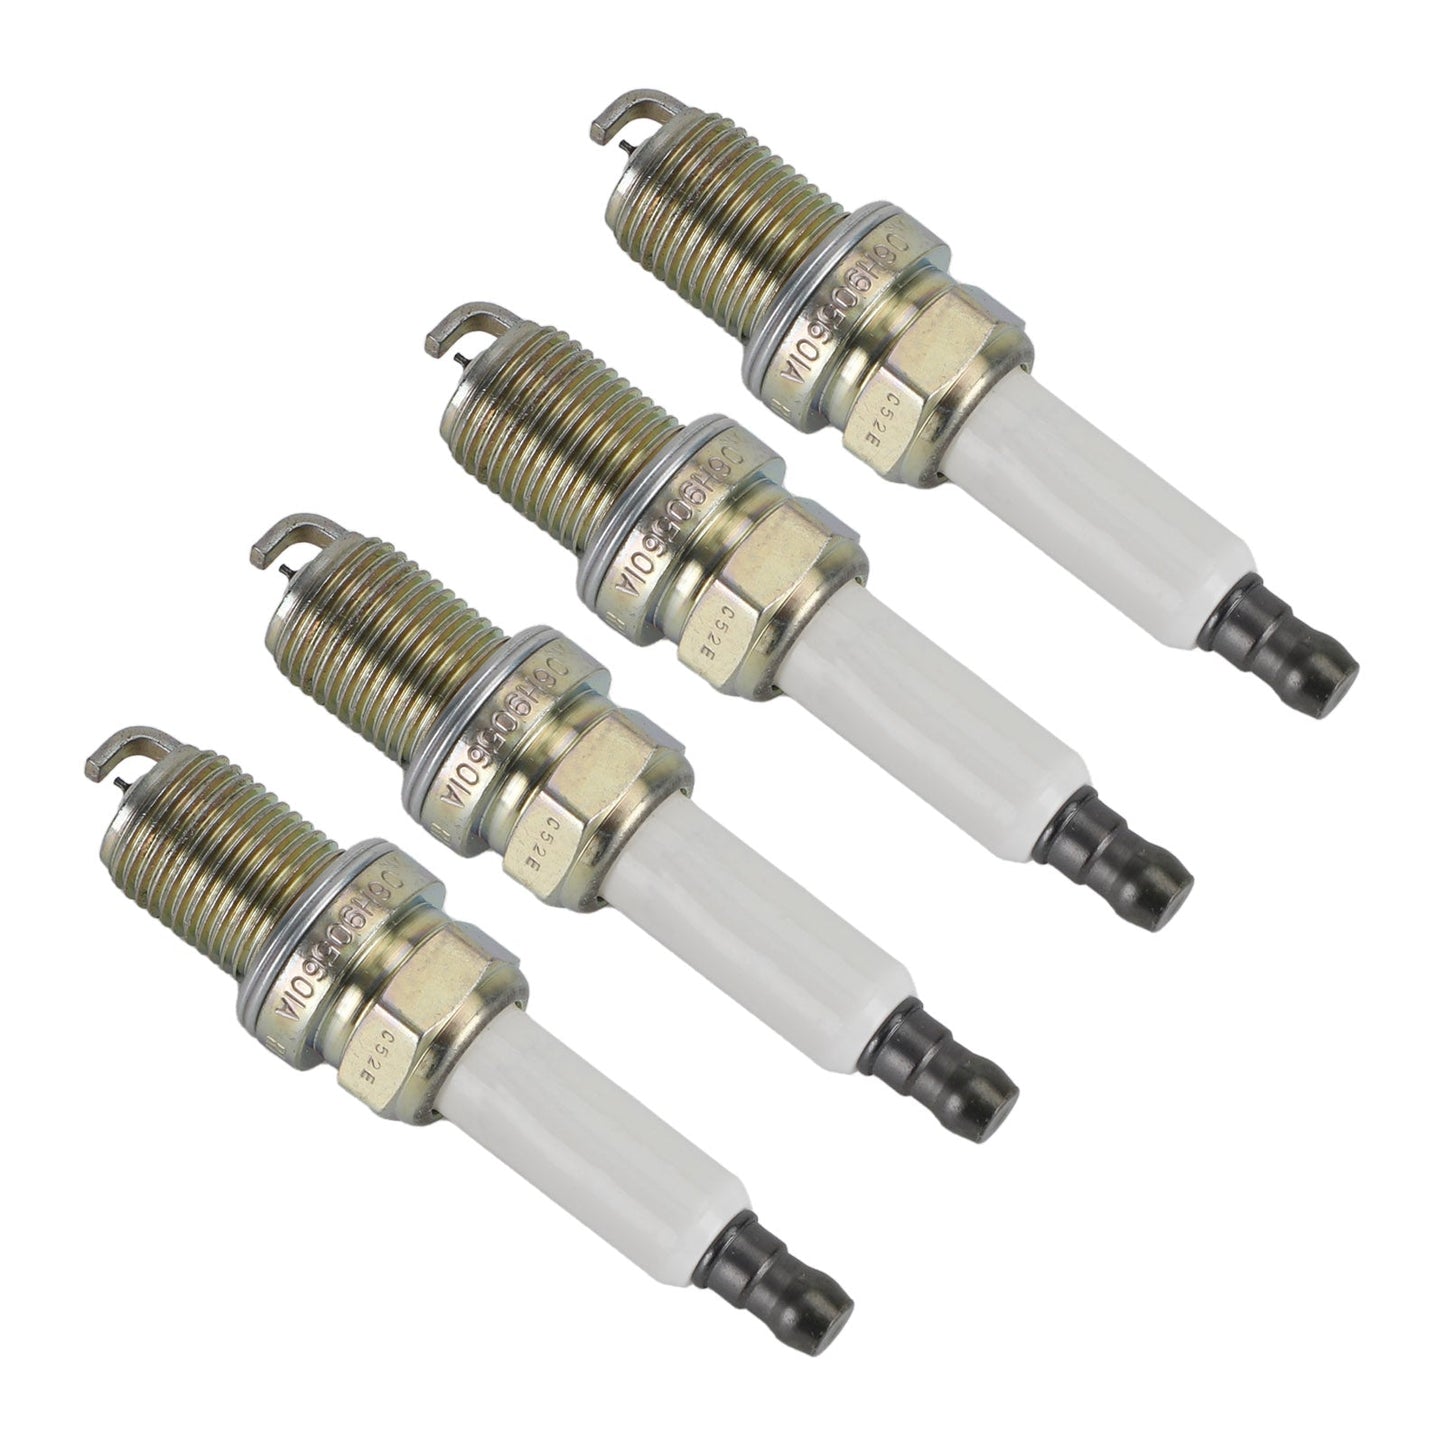 4x Spark Plugs 06H905604 06H905611 101905611G 0242245576 for Audi